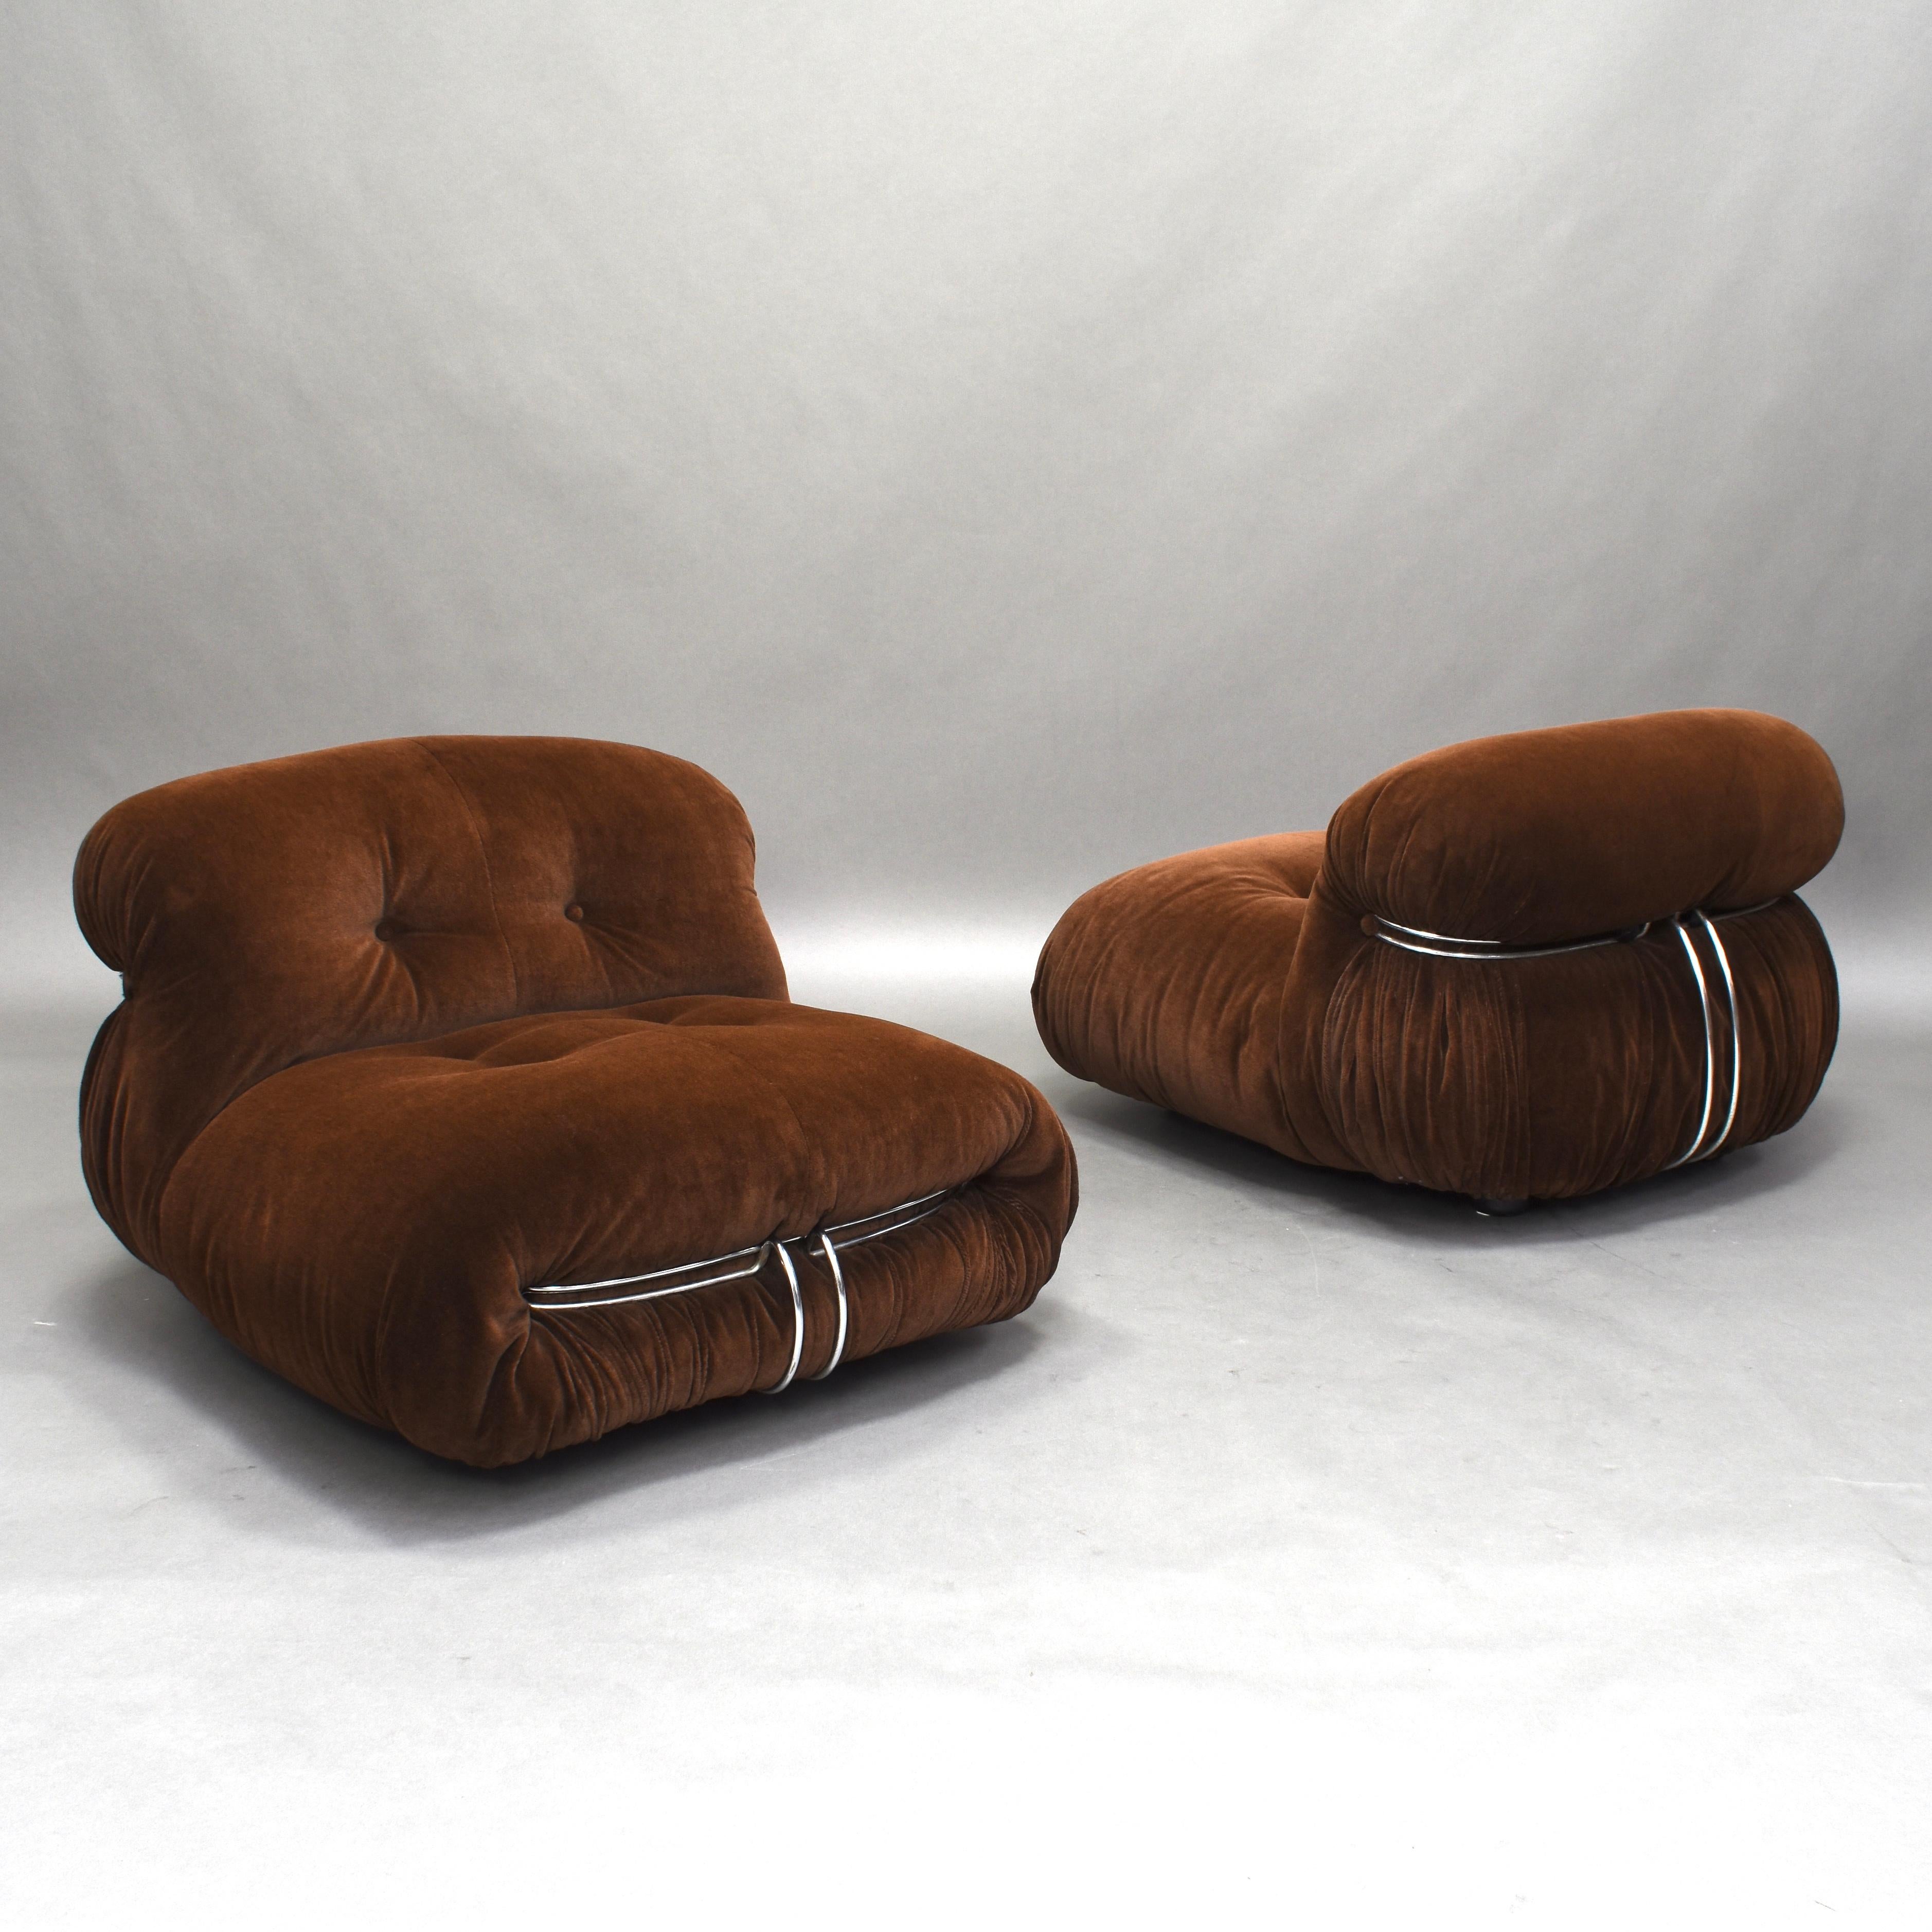 Soriana chairs by Afra and Tobia Scarpa for Cassina, Italy, circa 1970. 
The chairs still have their original dark brown Mohair velvet and remain in very good condition.

Original dark brown Mohair velvet fabric. 

Designer: Afra and Tobia